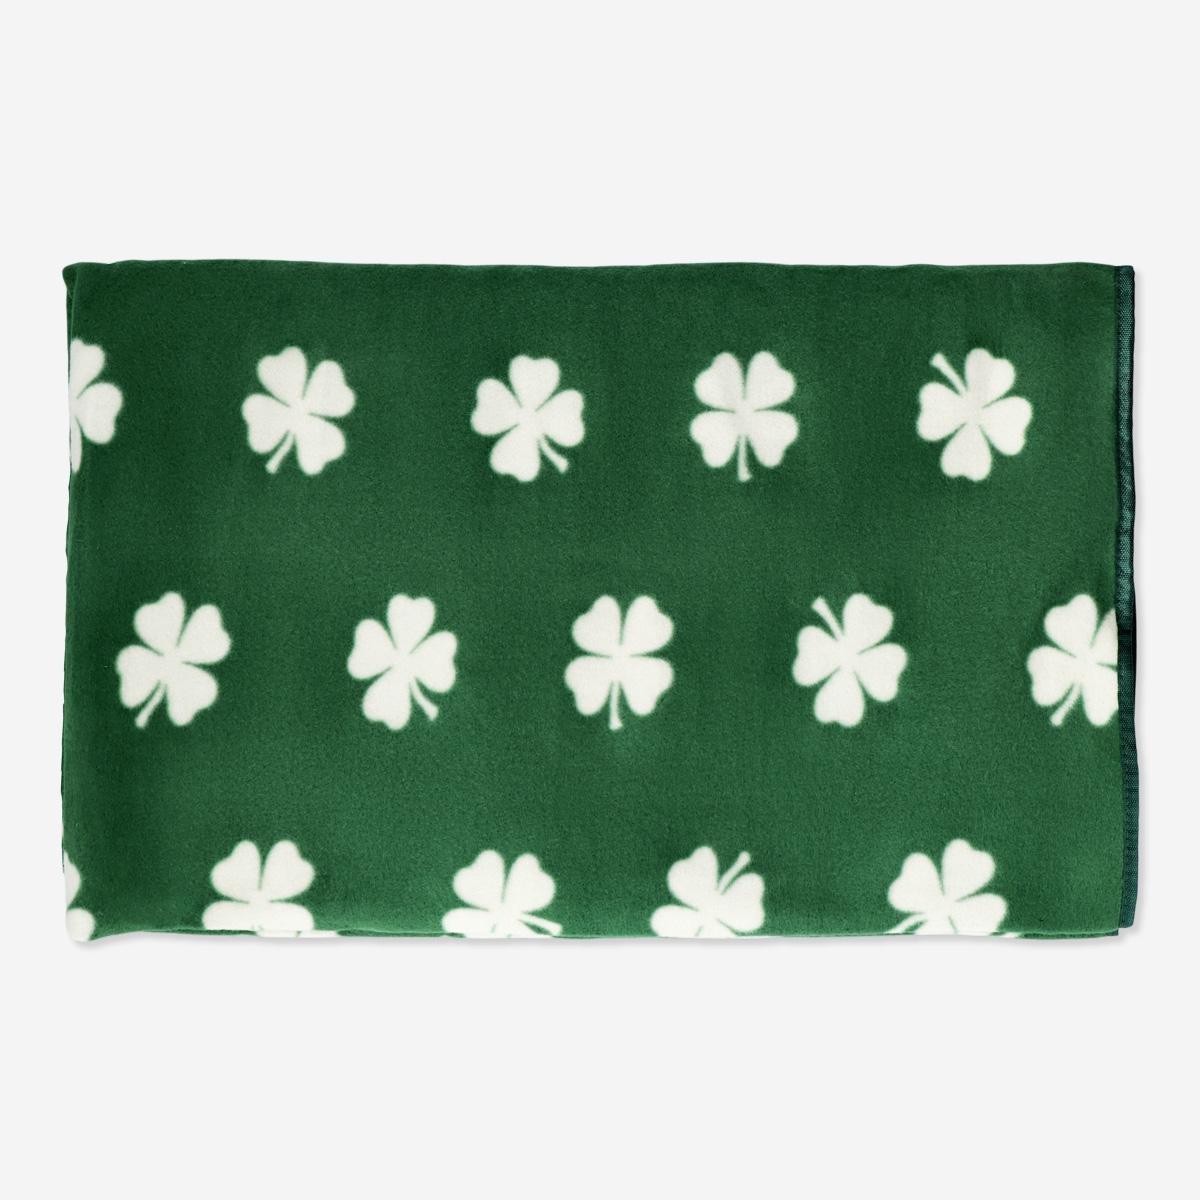 Green picnic blanket. with carrying strap